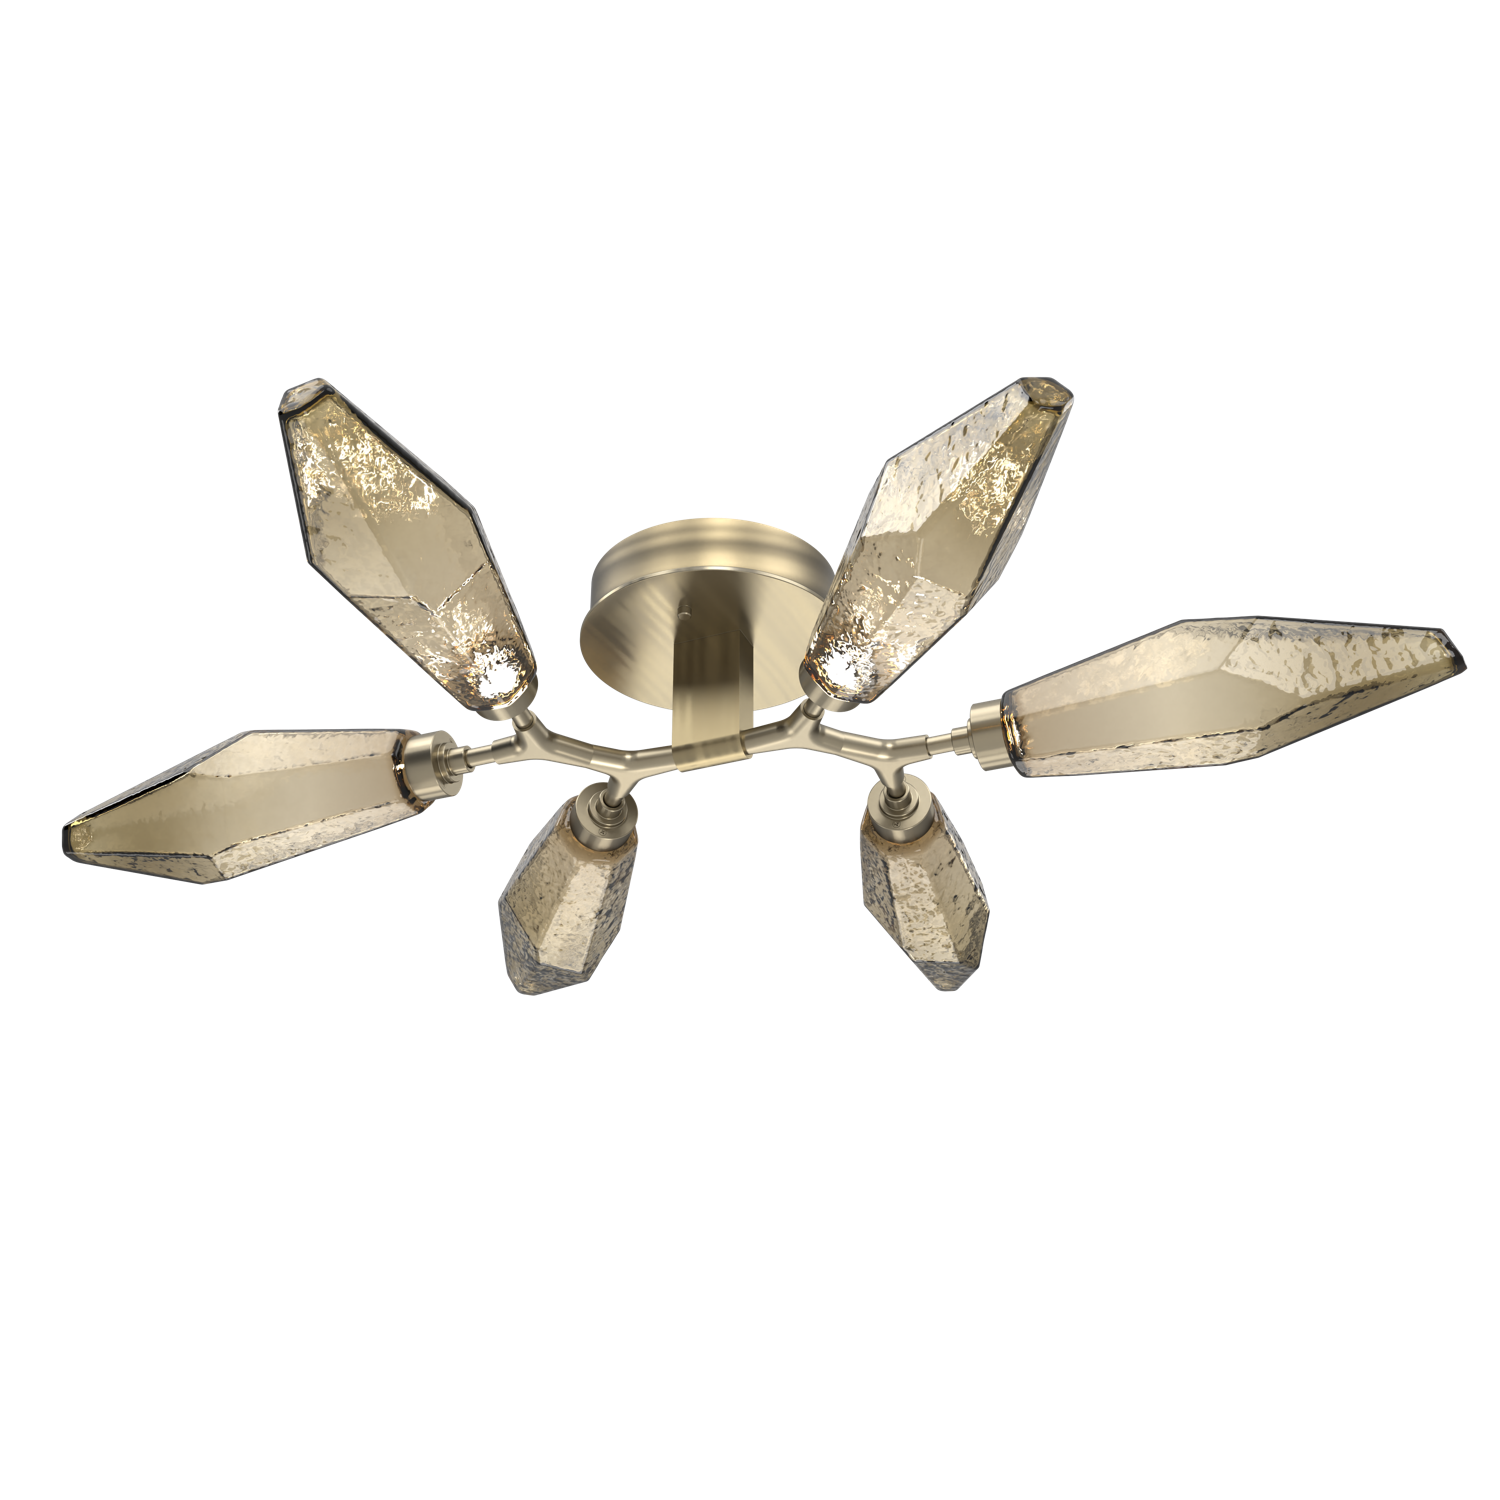 CLB0050-01-HB-CB-Hammerton-Studio-Rock-Crystal-flush-mount-light-with-heritage-brass-finish-and-chilled-bronze-blown-glass-shades-and-LED-lamping